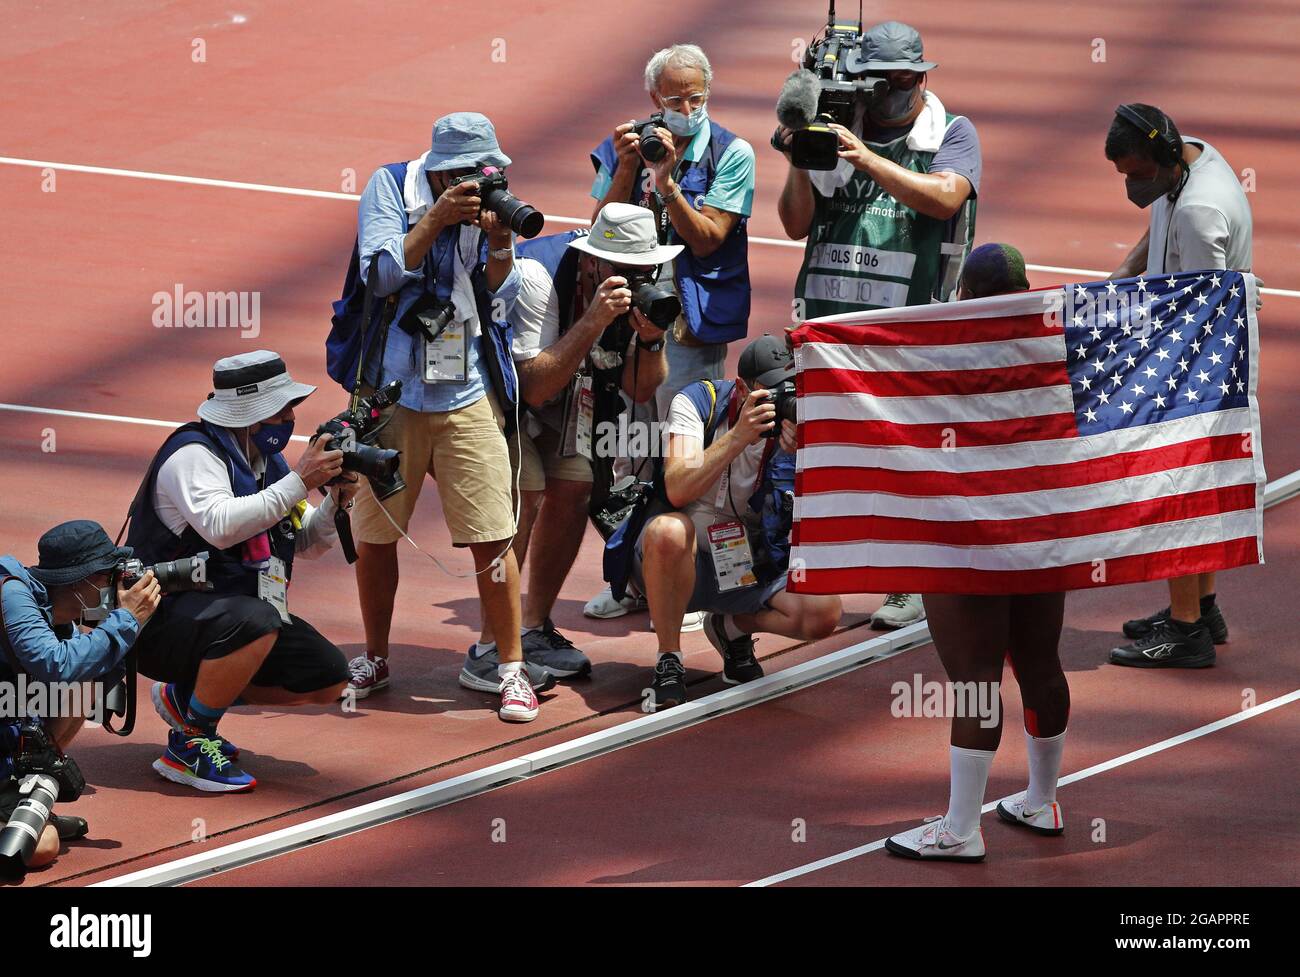 Tokyo, Japan. 31st July, 2021. Raven Saunders of the USA holds the national flag after winning the silver medal in Women's Shot Put at the Athletics competition during the Tokyo Summer Olympics in Tokyo, Japan, on Sunday, August 1, 2021. Photo by Bob Strong/UPI. Credit: UPI/Alamy Live News Stock Photo